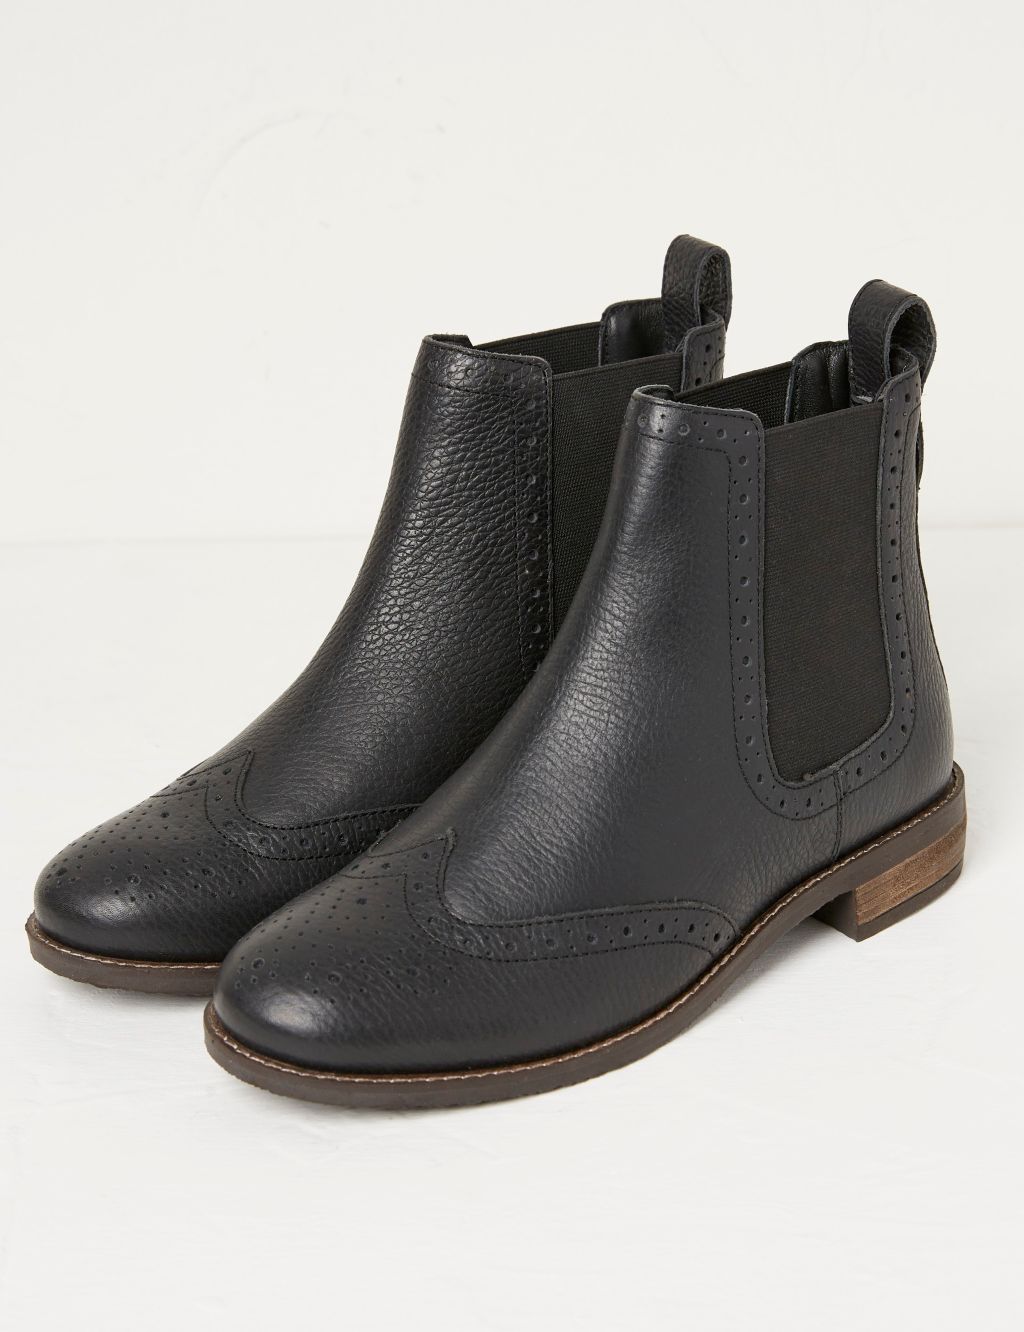 Leather Chelsea Block Heel Ankle Boots image 2